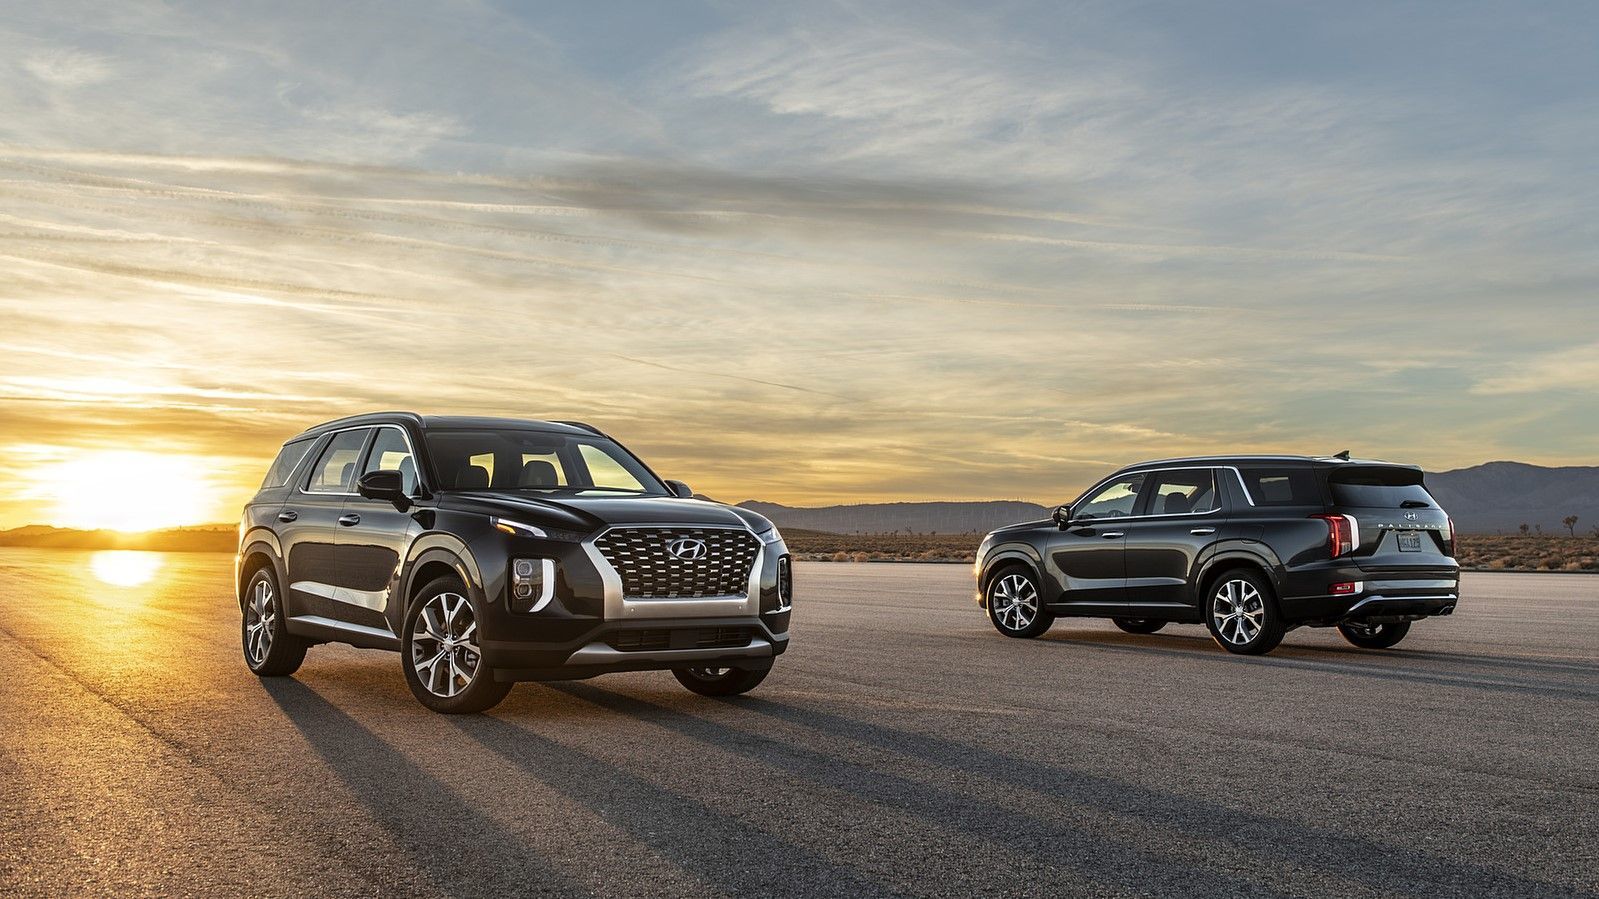 Hyundai Palisade Review: Release Date, Prices, Trims, Engine